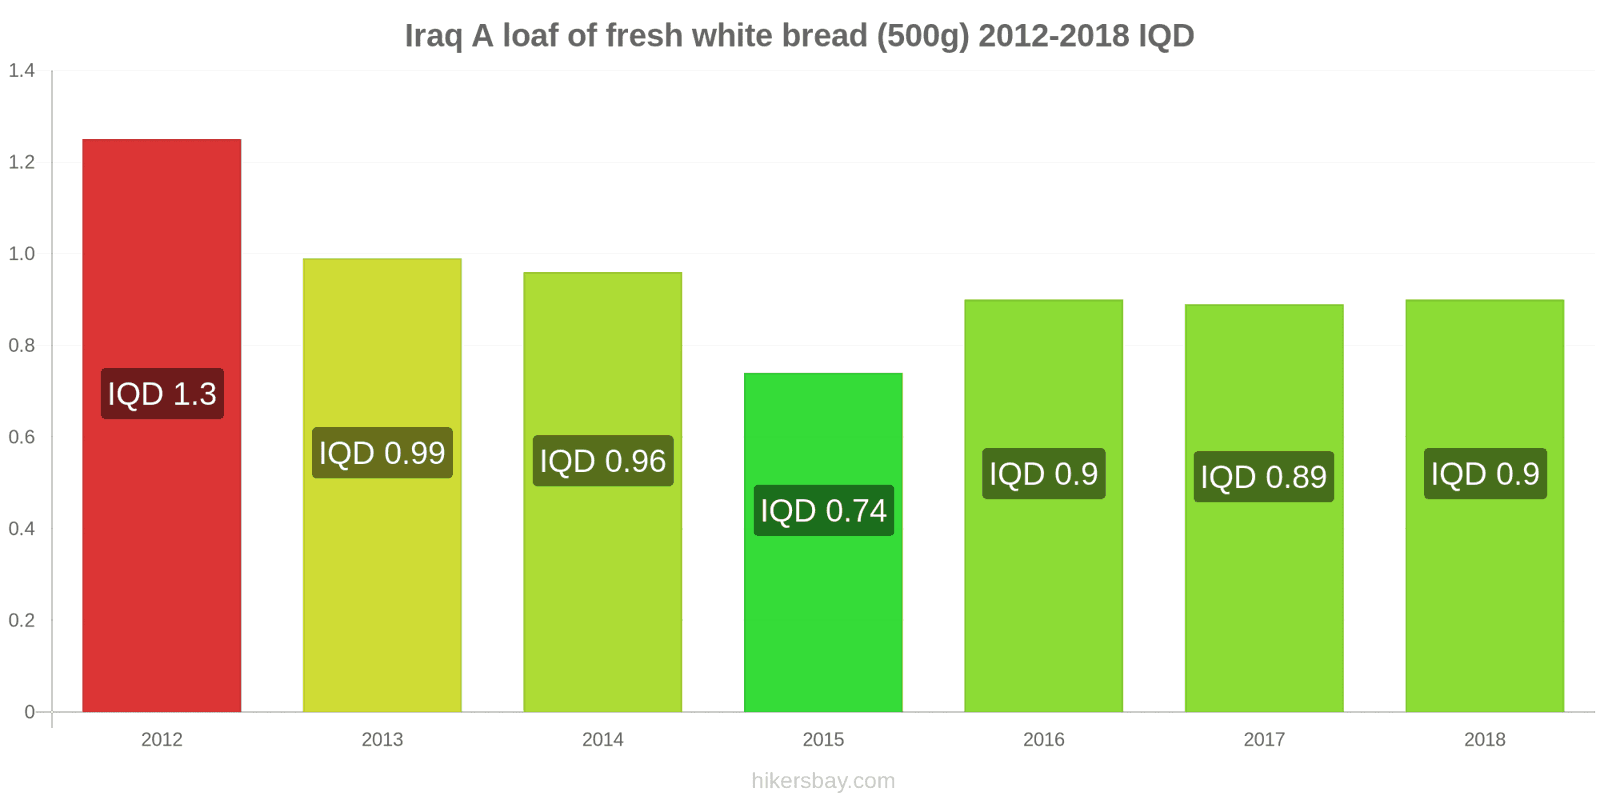 Iraq price changes A loaf of fresh white bread (500g) hikersbay.com